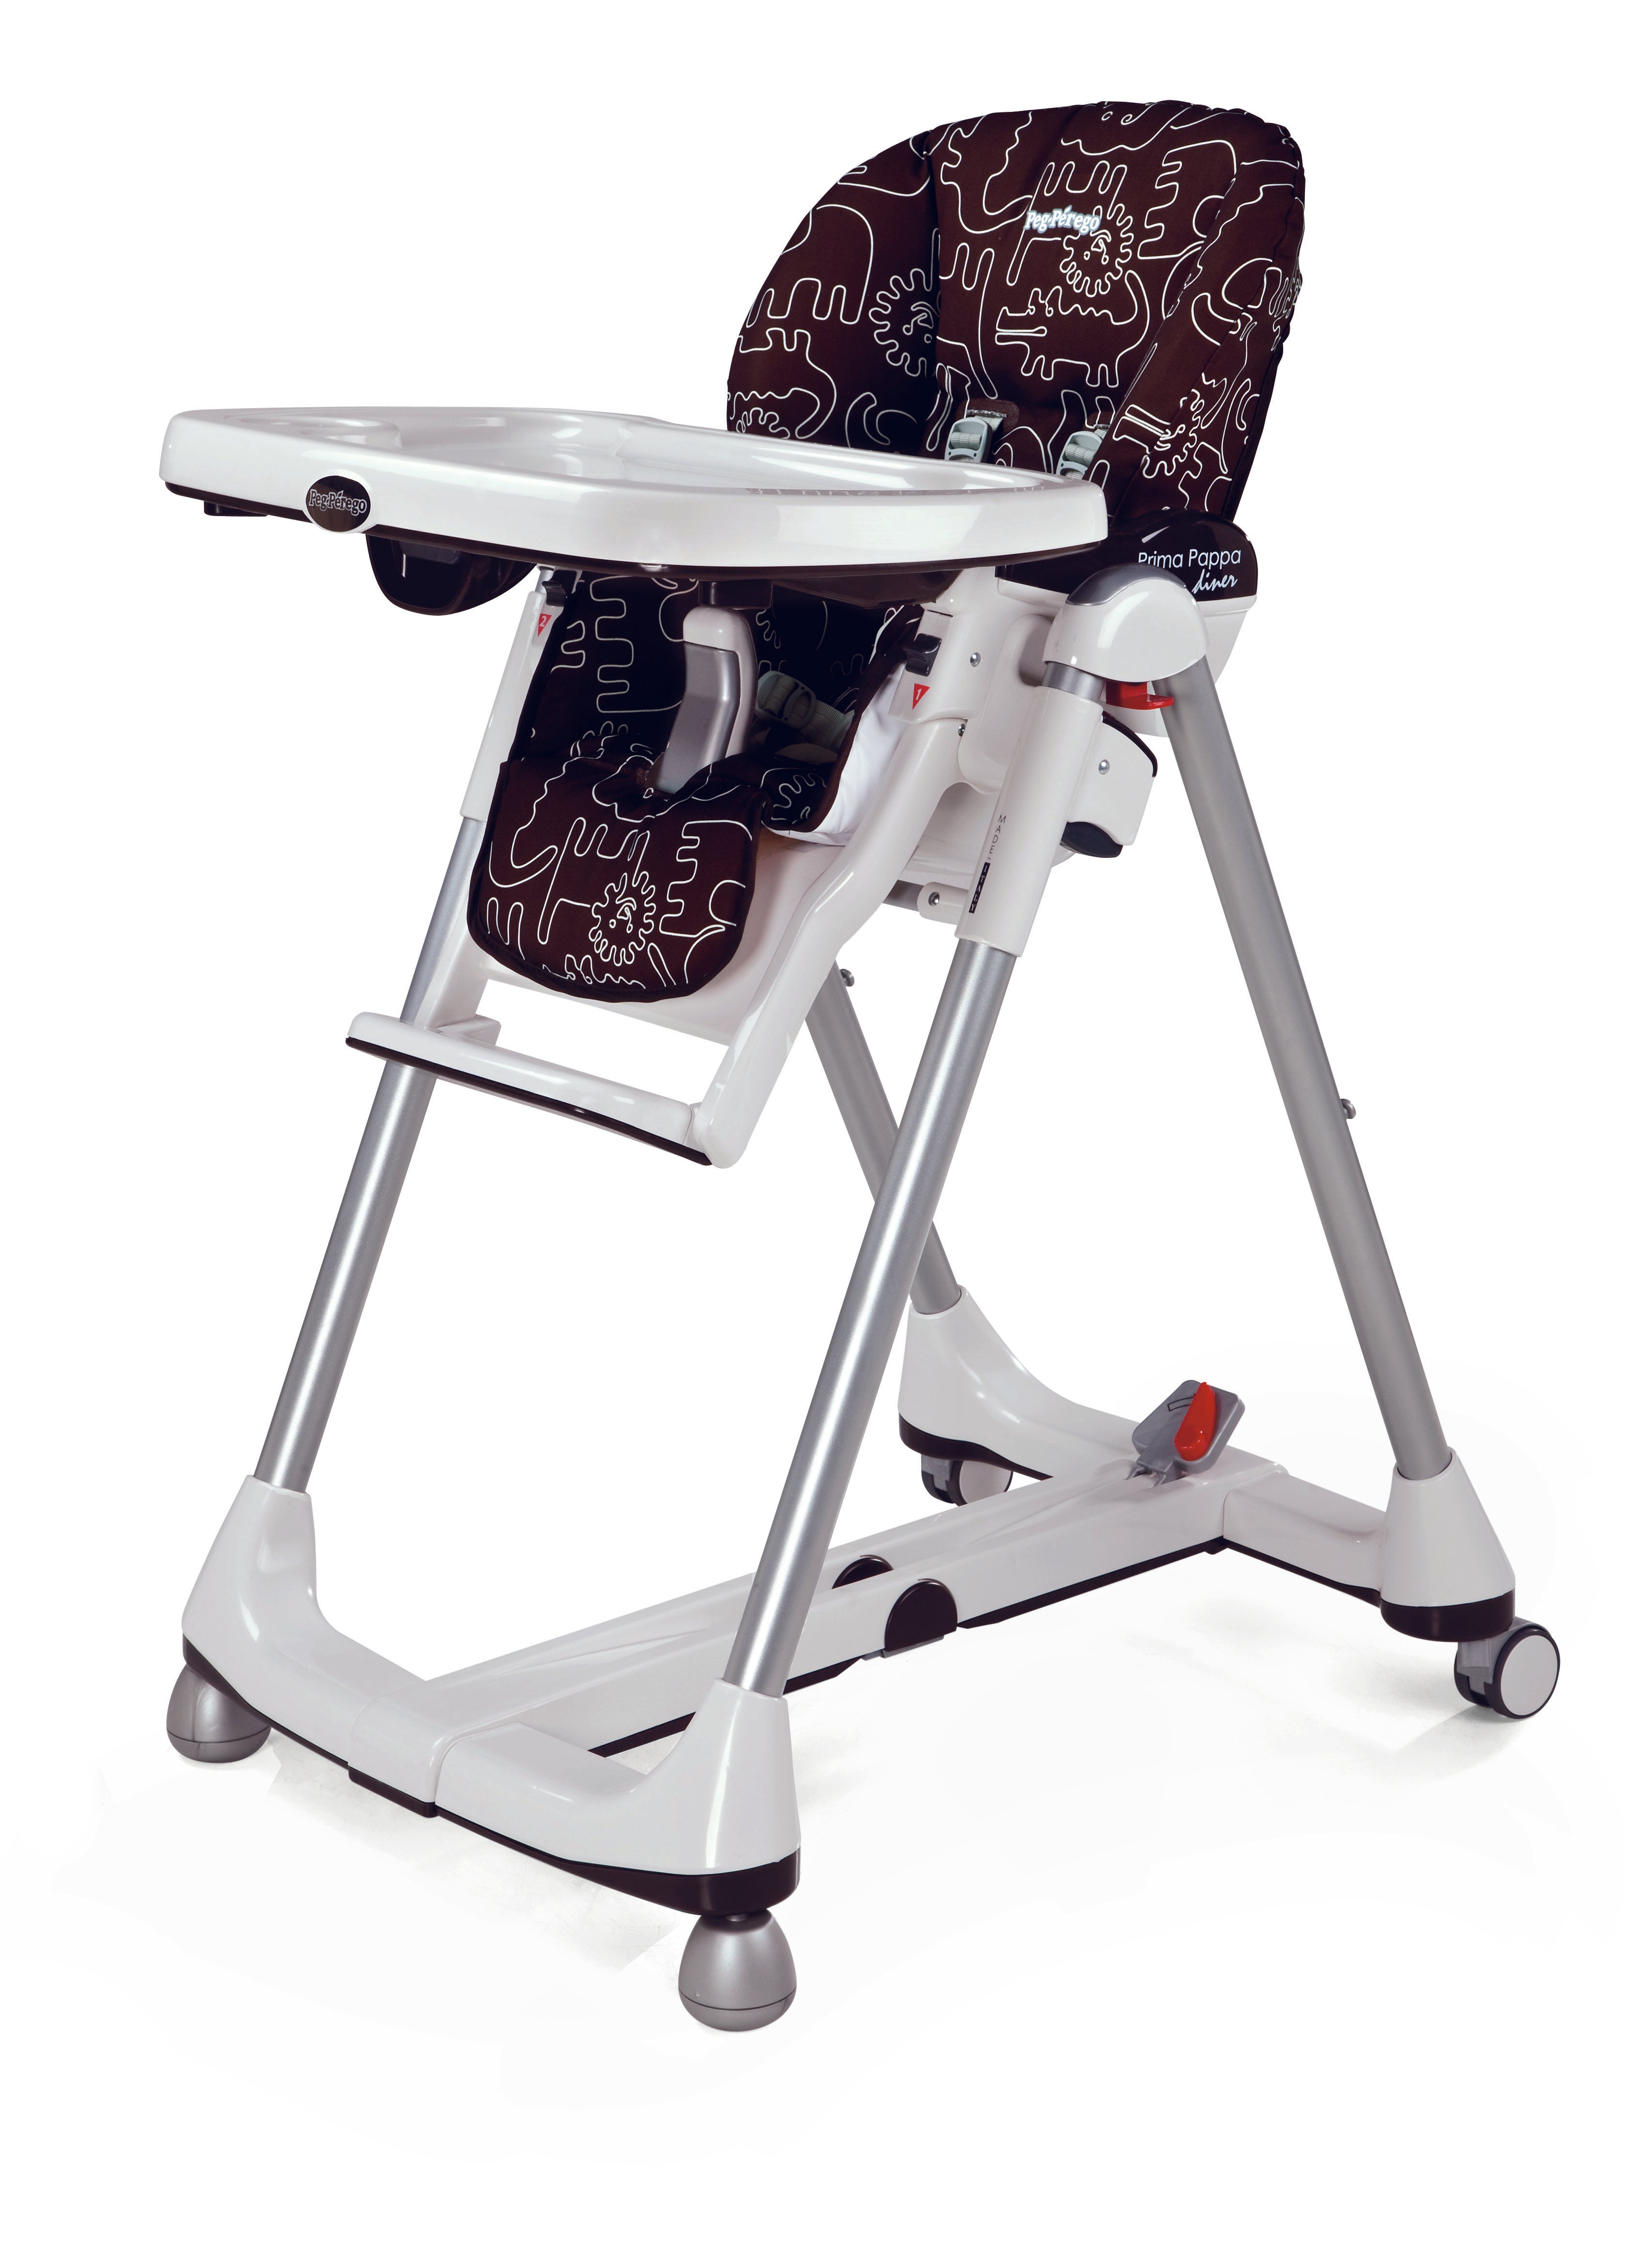 Peg Perego highchair replacement cover. Available in South Africa with CB Baby online store.